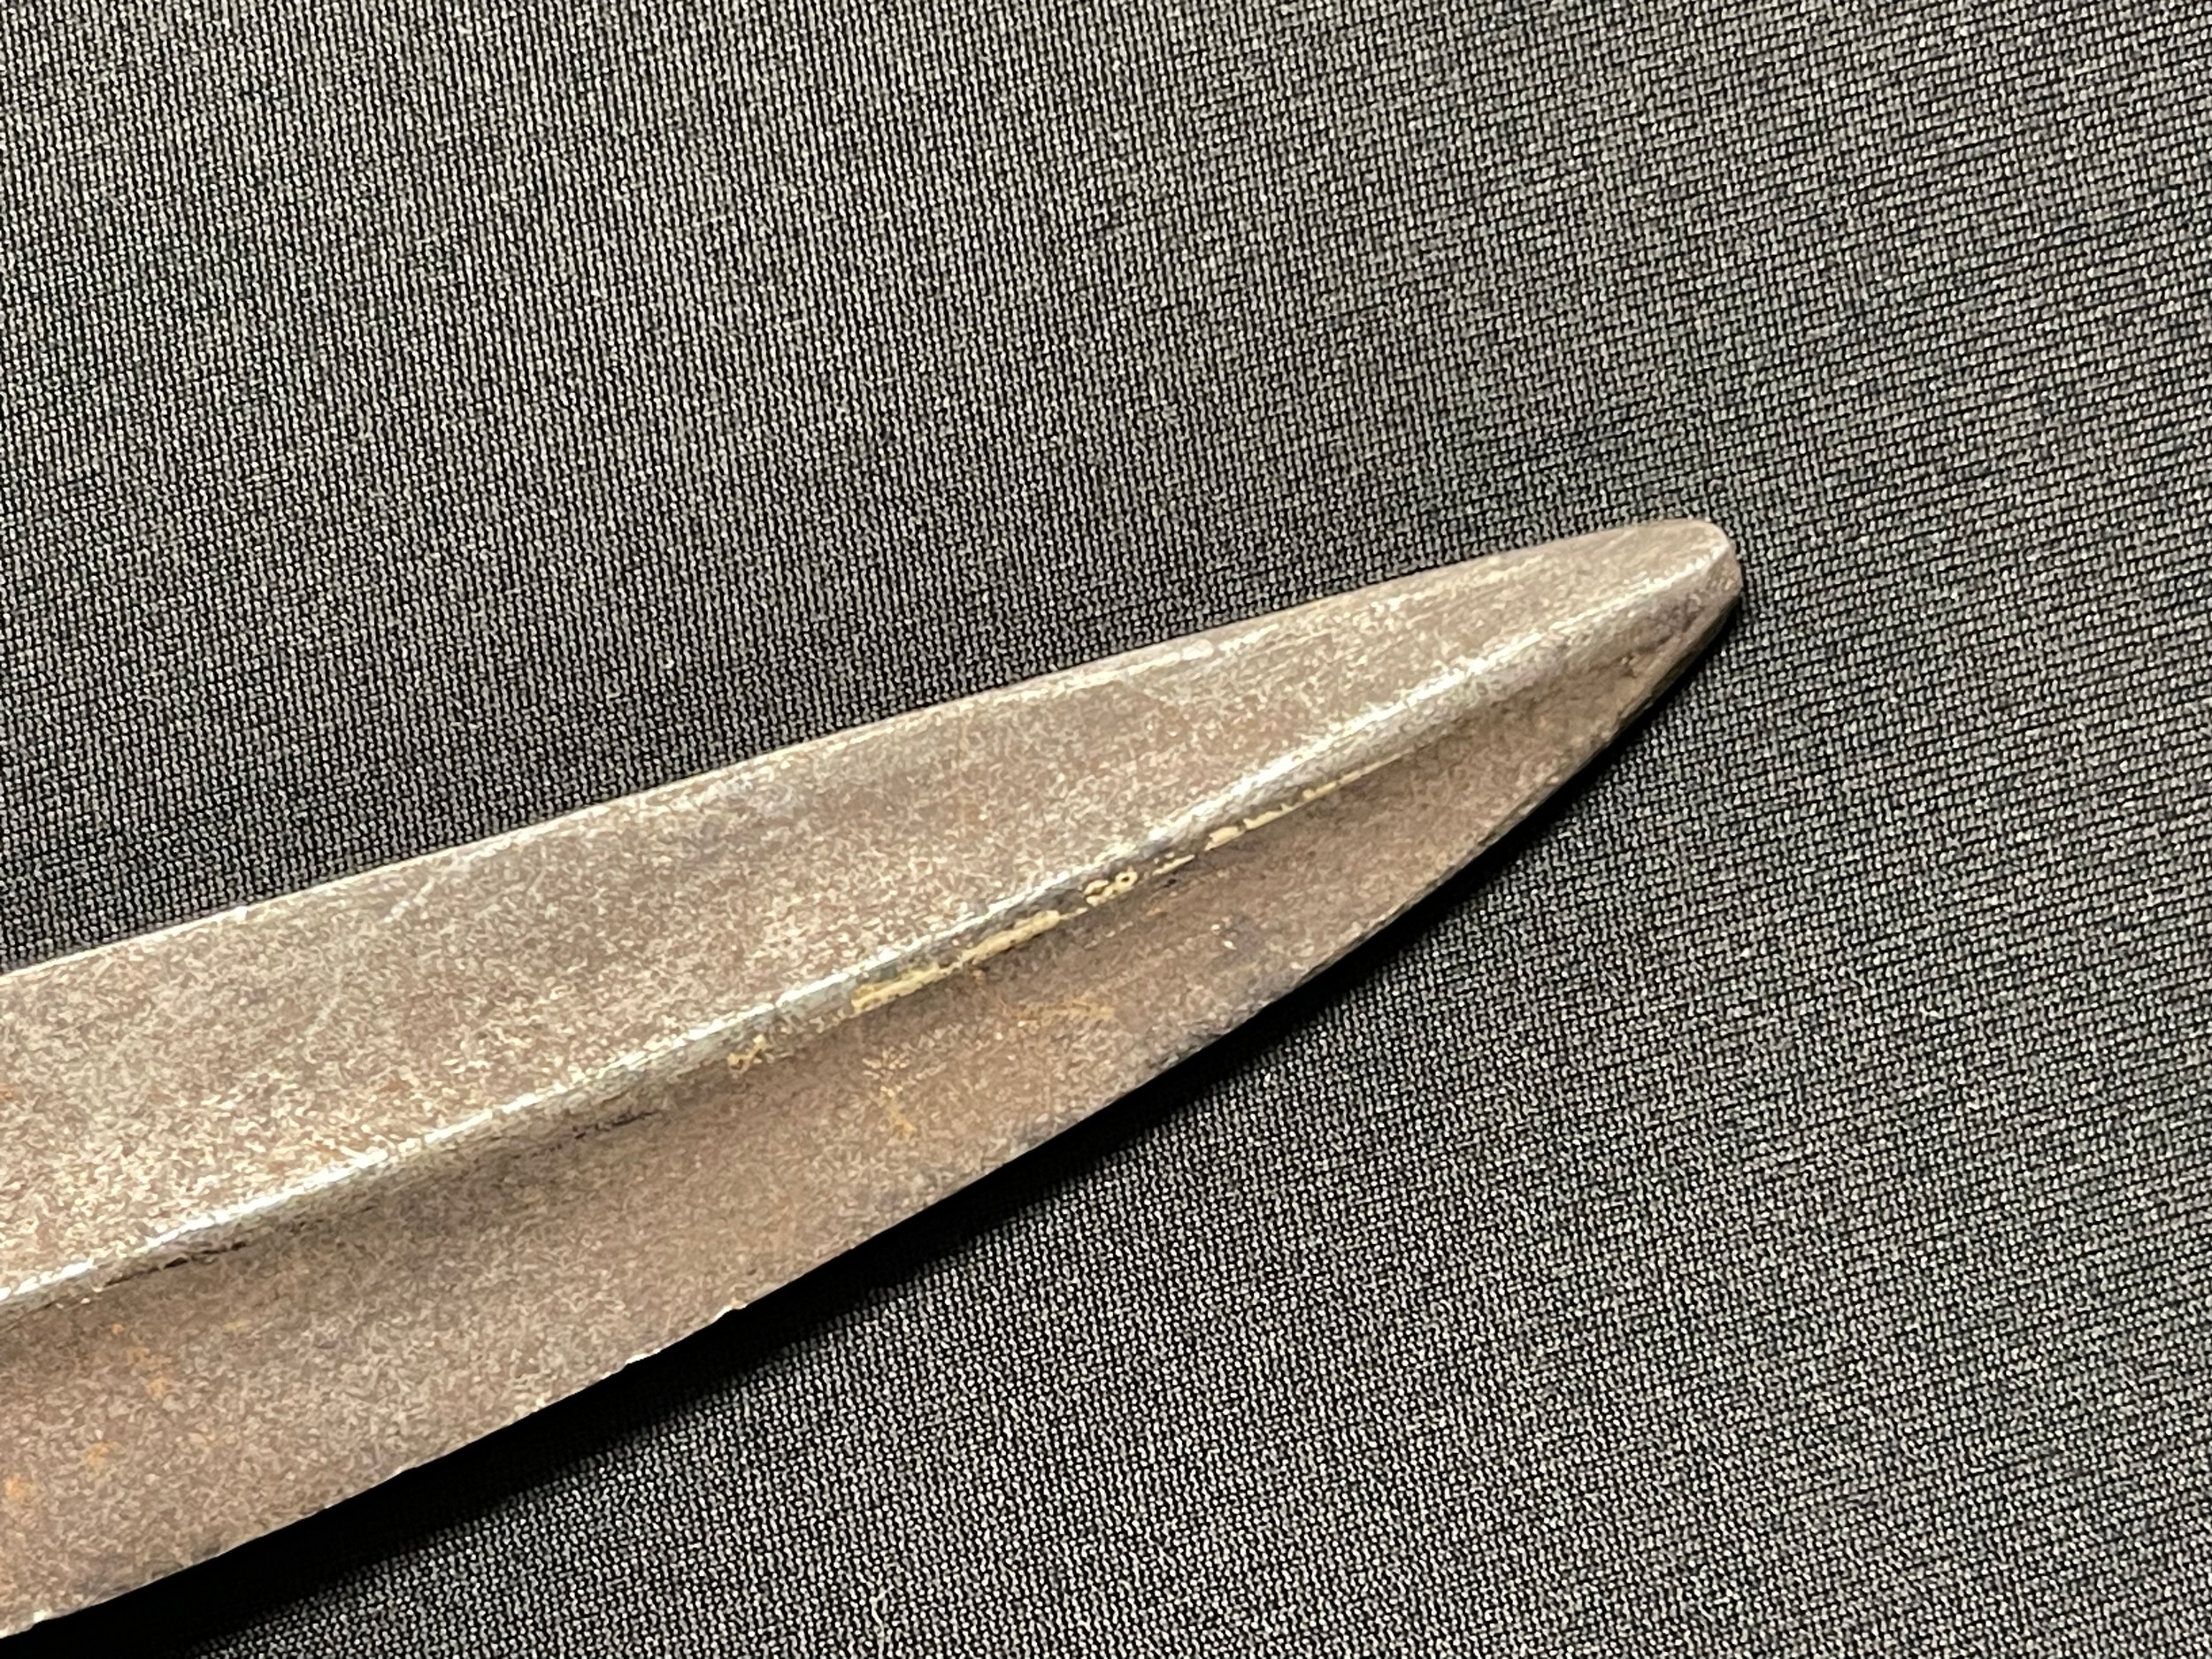 A Middle Eastern kindjal dagger, 24cm curved blade with central ridge, horn handle, 39cm long - Image 3 of 17